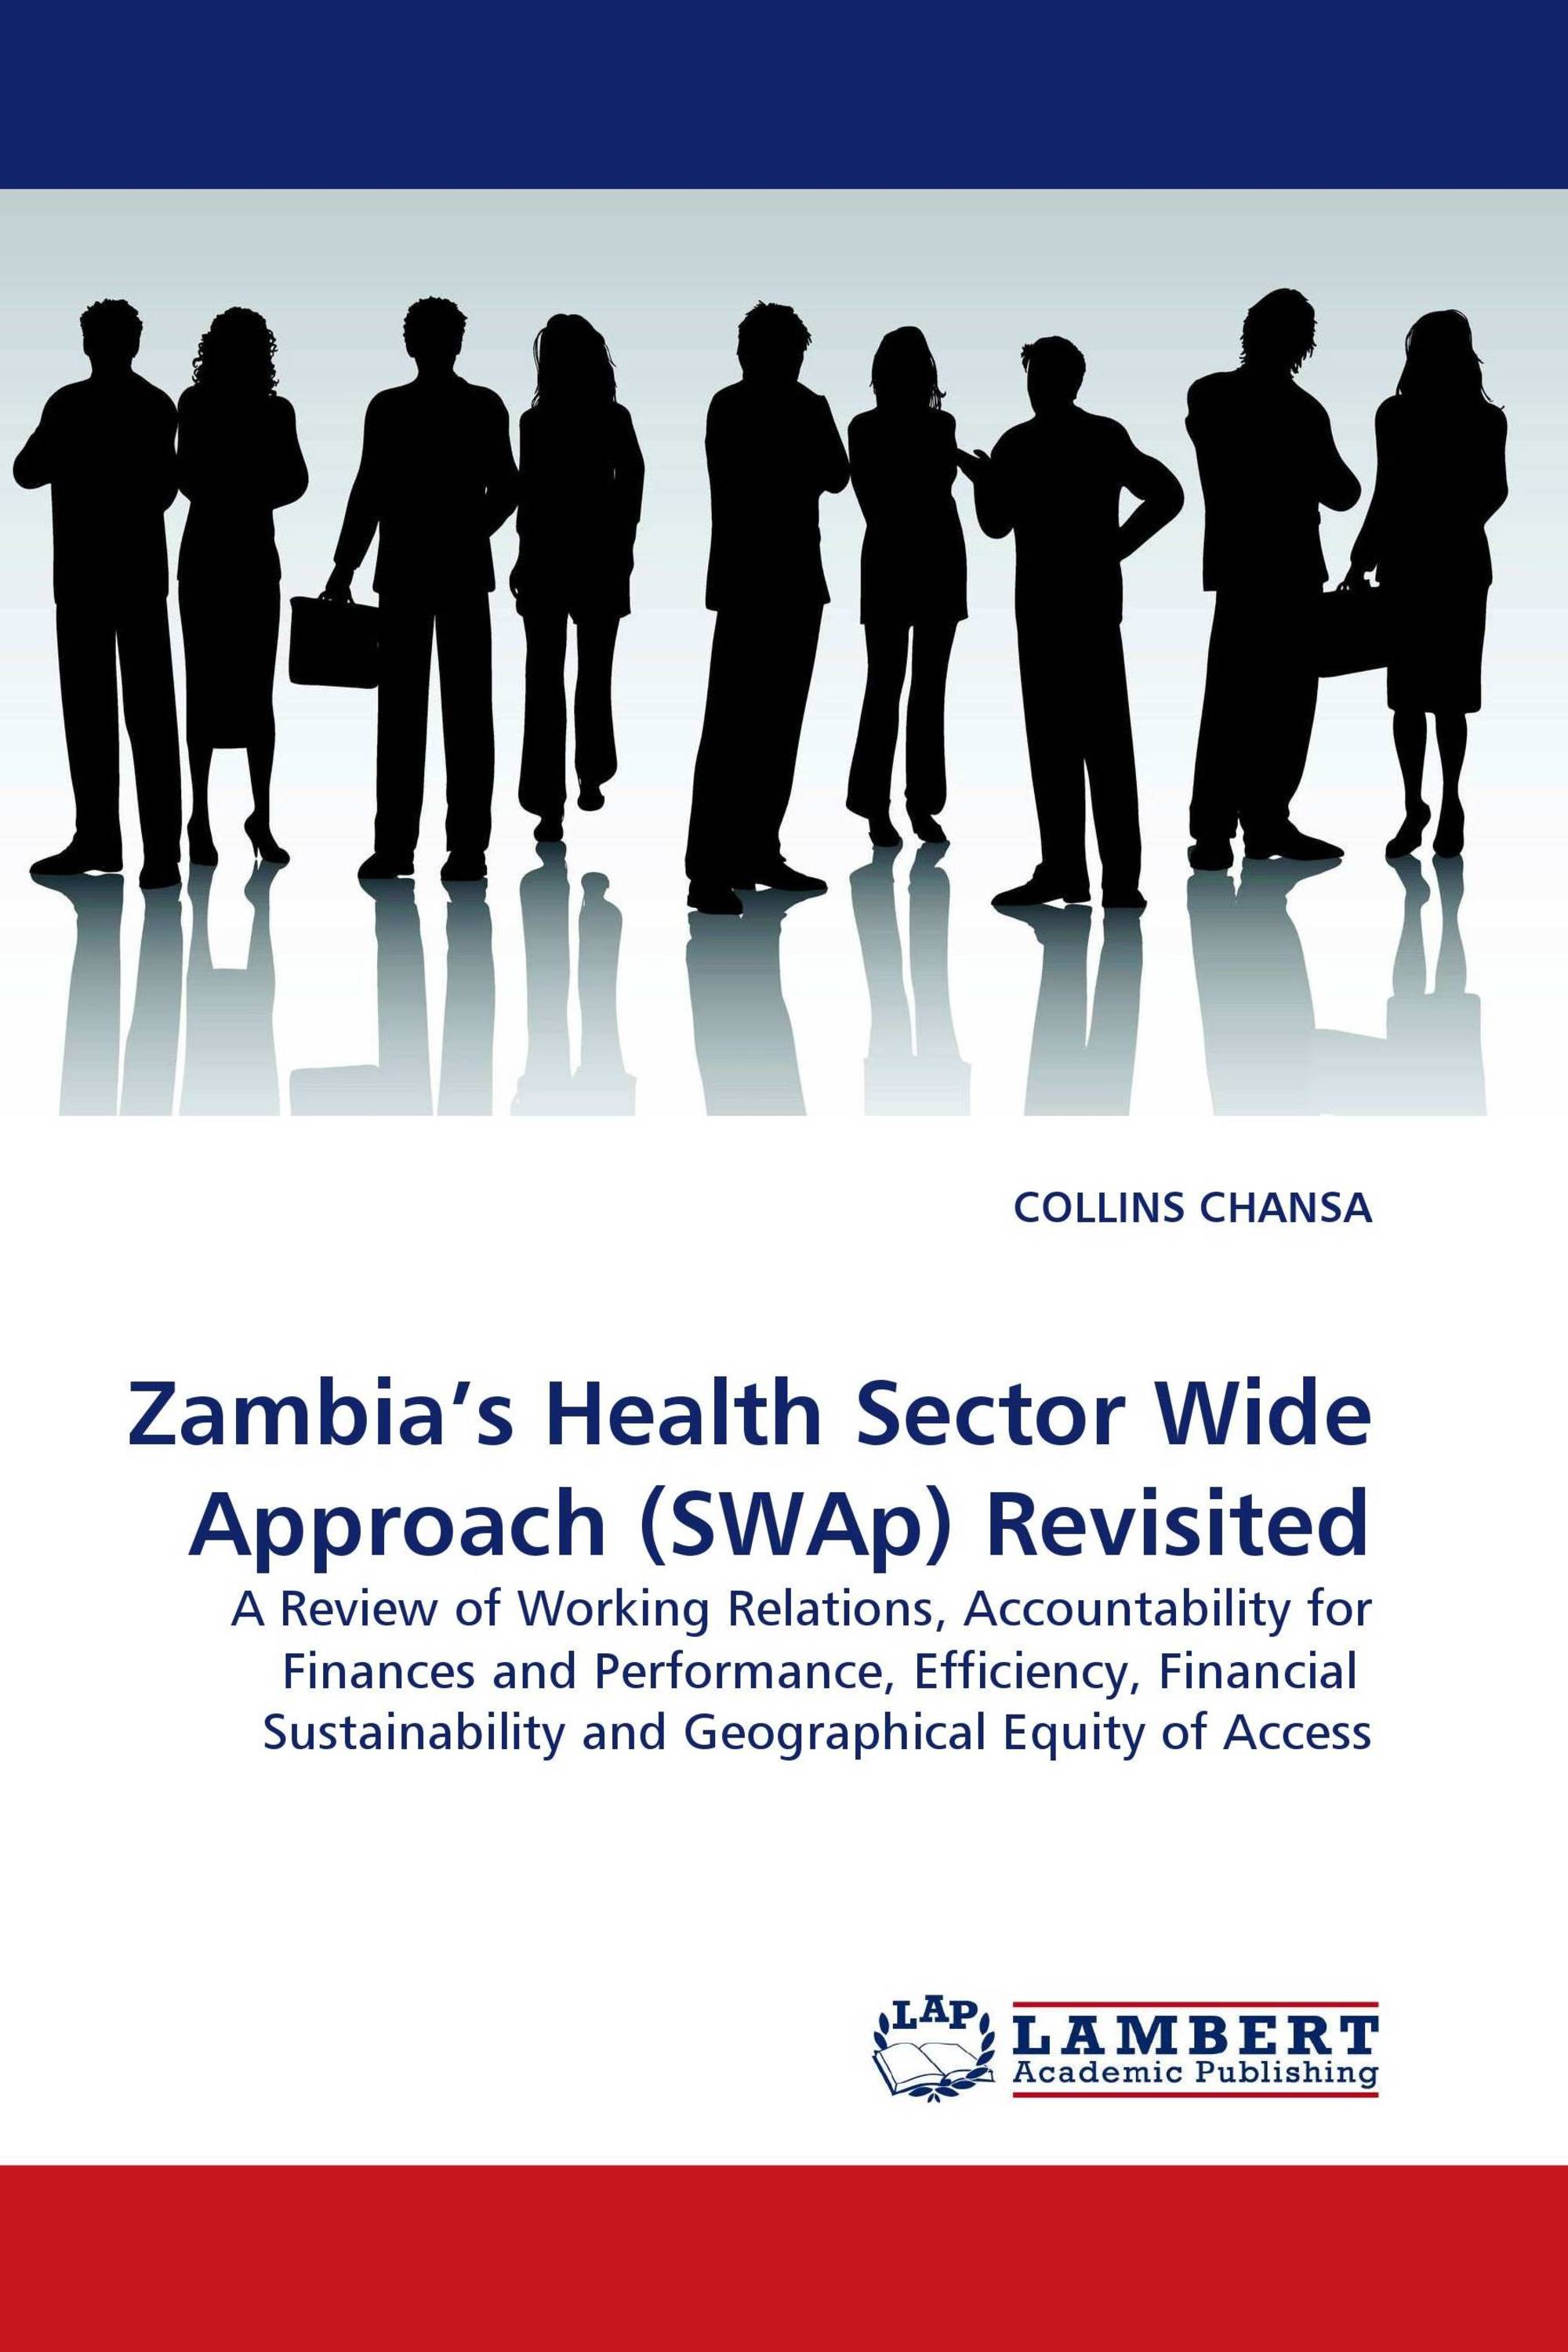 Zambia’s Health Sector Wide Approach (SWAp) Revisited